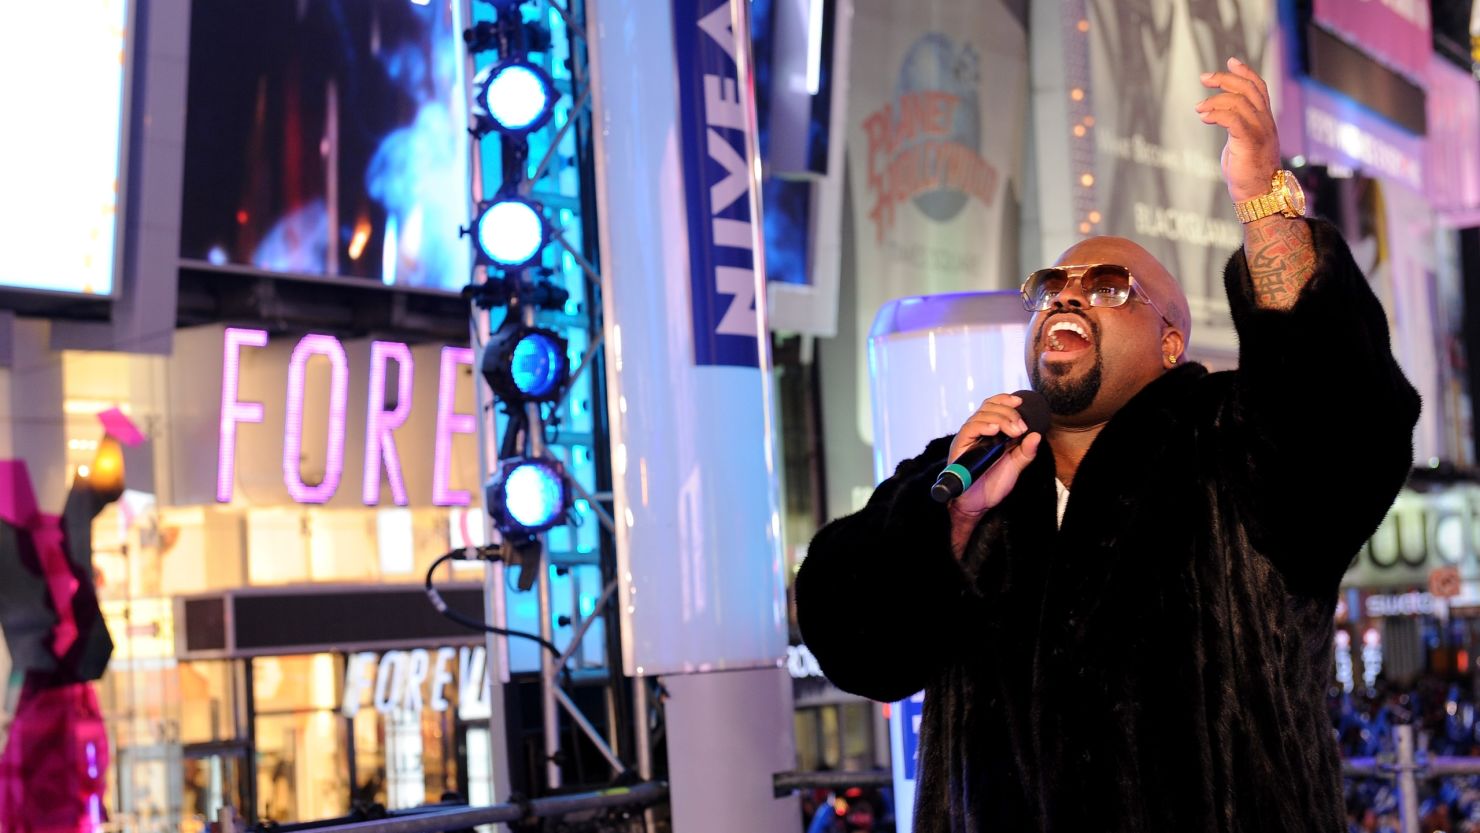 Cee Lo Green has announced that he will not be returning as a coach on the singing competition show "The Voice."